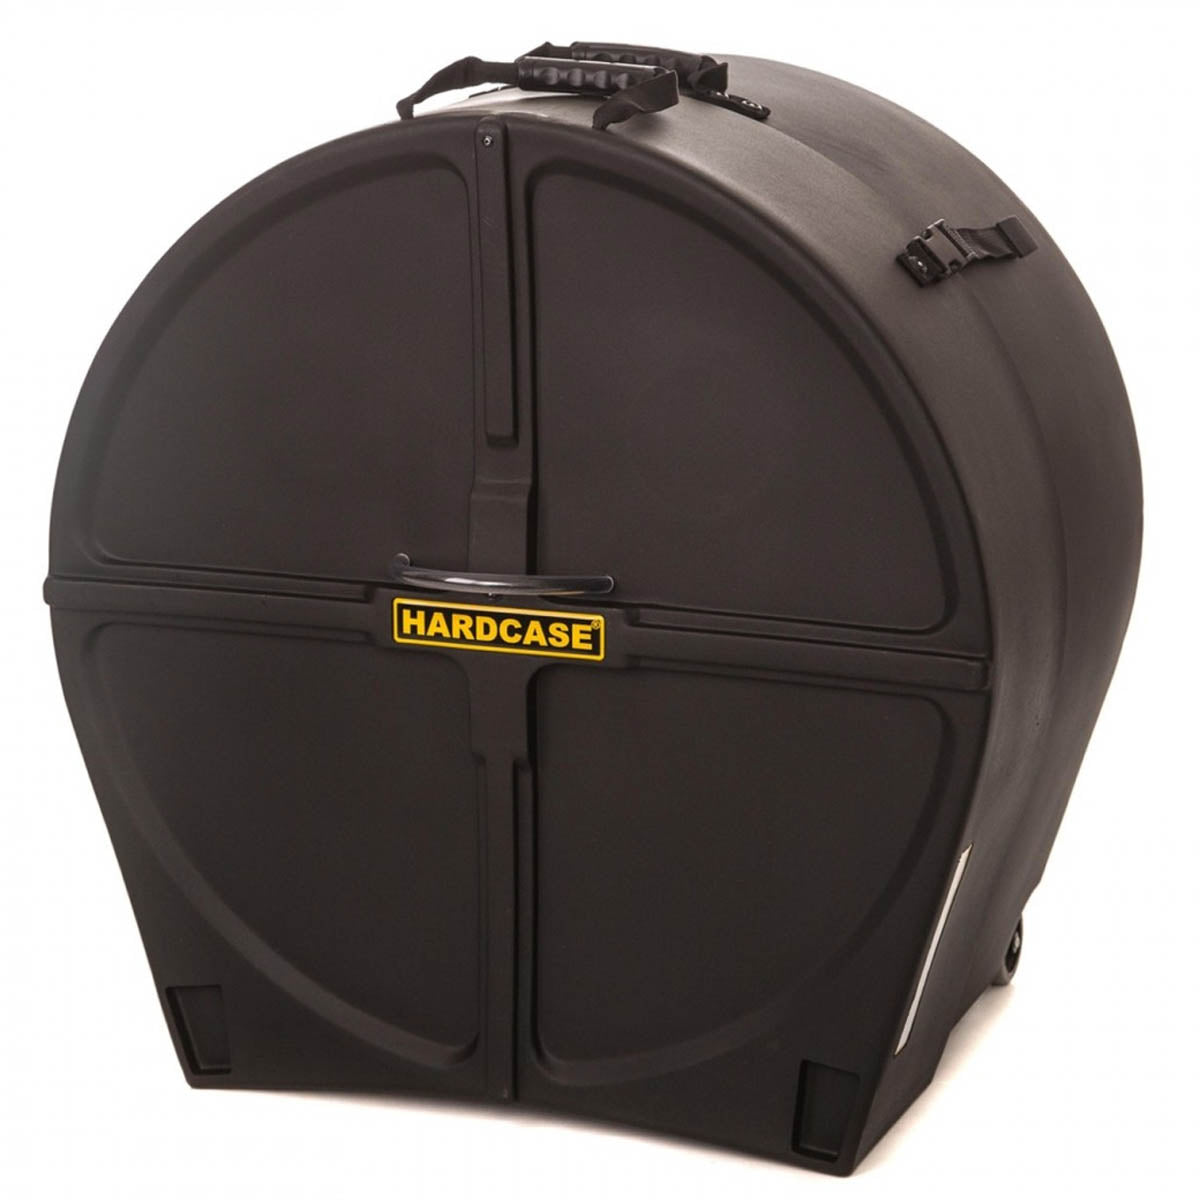 Hardcase 26" Bass Drum Case with Wheels